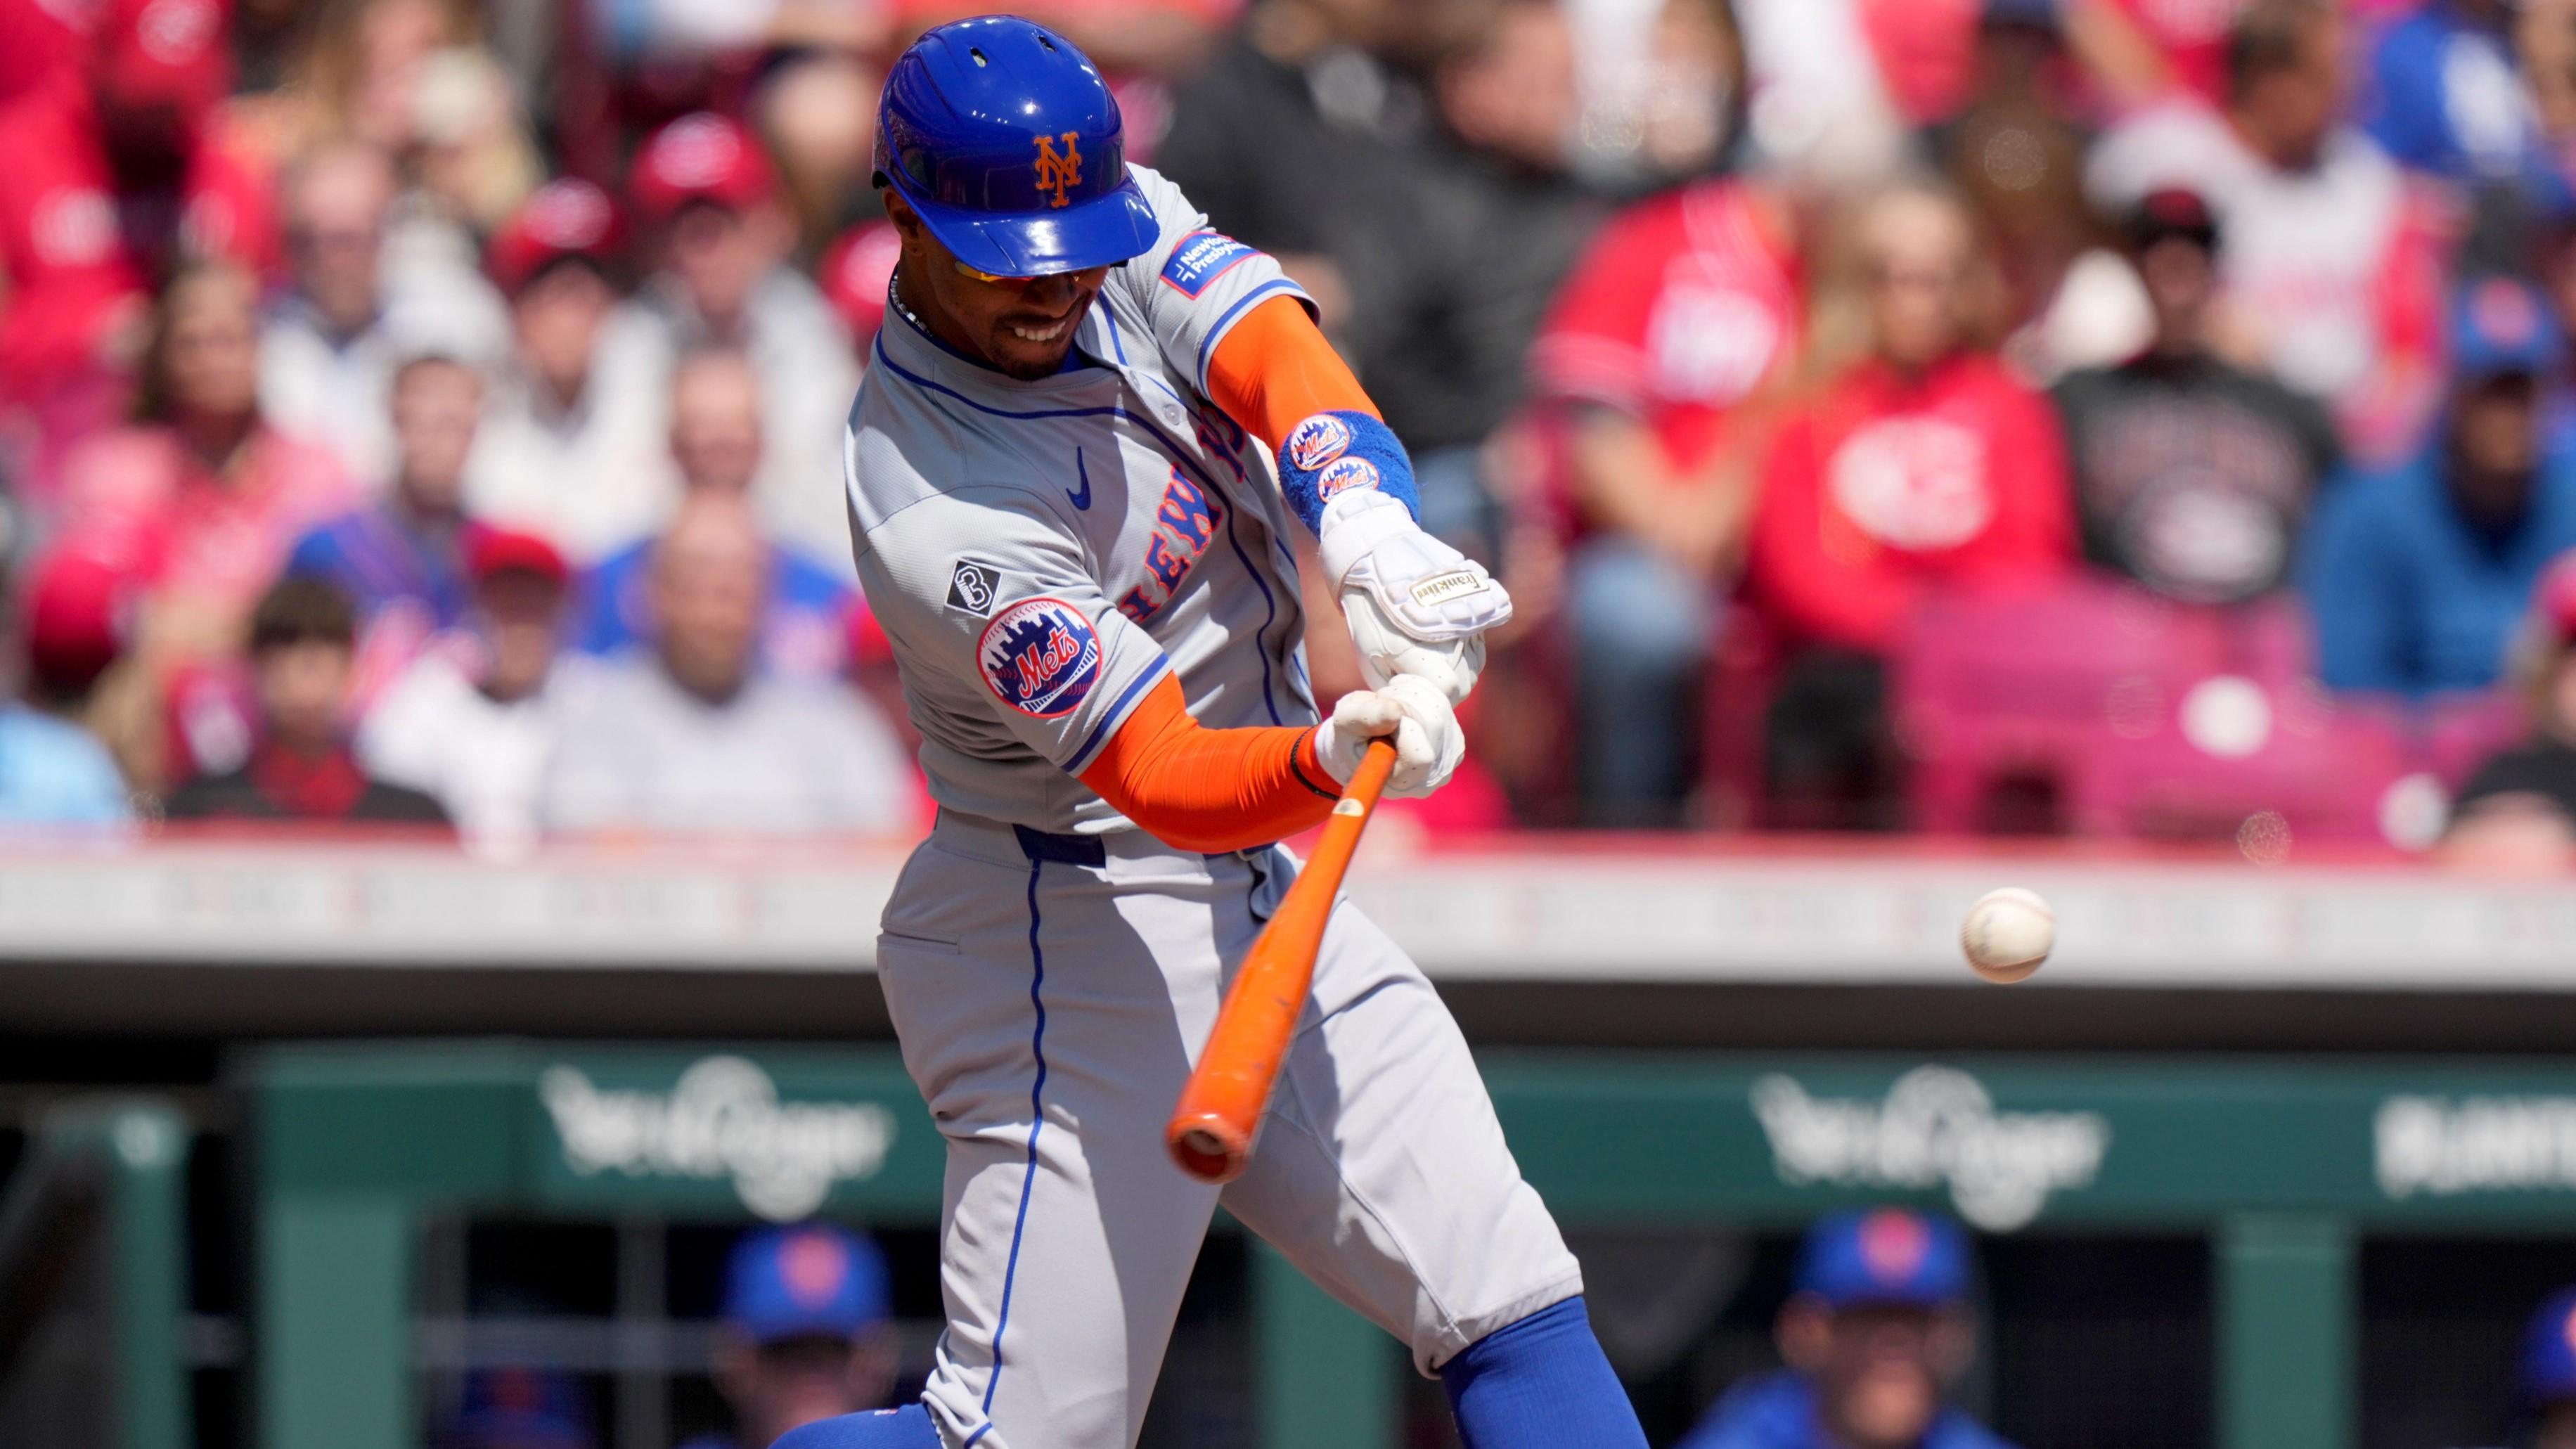 New York Mets shortstop Francisco Lindor (12) hits a double in the first inning of an MLB baseball game against the Cincinnati Reds, Sunday, April 7, 2024, at Great American Ball Park in Cincinnati. / Kareem Elgazzar/The Enquirer / USA TODAY NETWORK